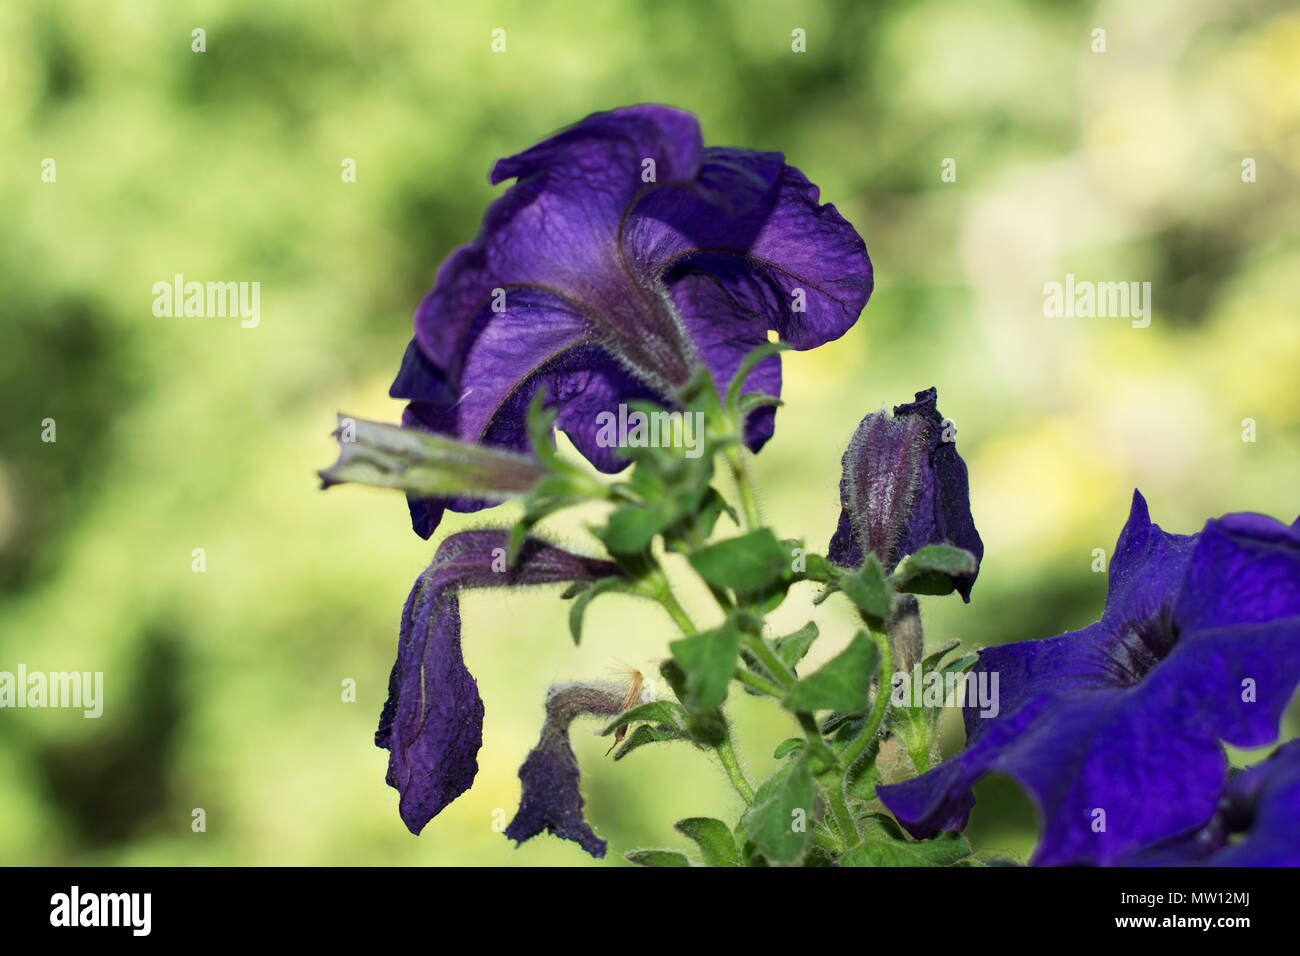 Petunia hybrida. Plant’s hairy foliage is visible along with its purple and bluish withered and blooming flowers. A beautiful bokeh in a background. Stock Photo